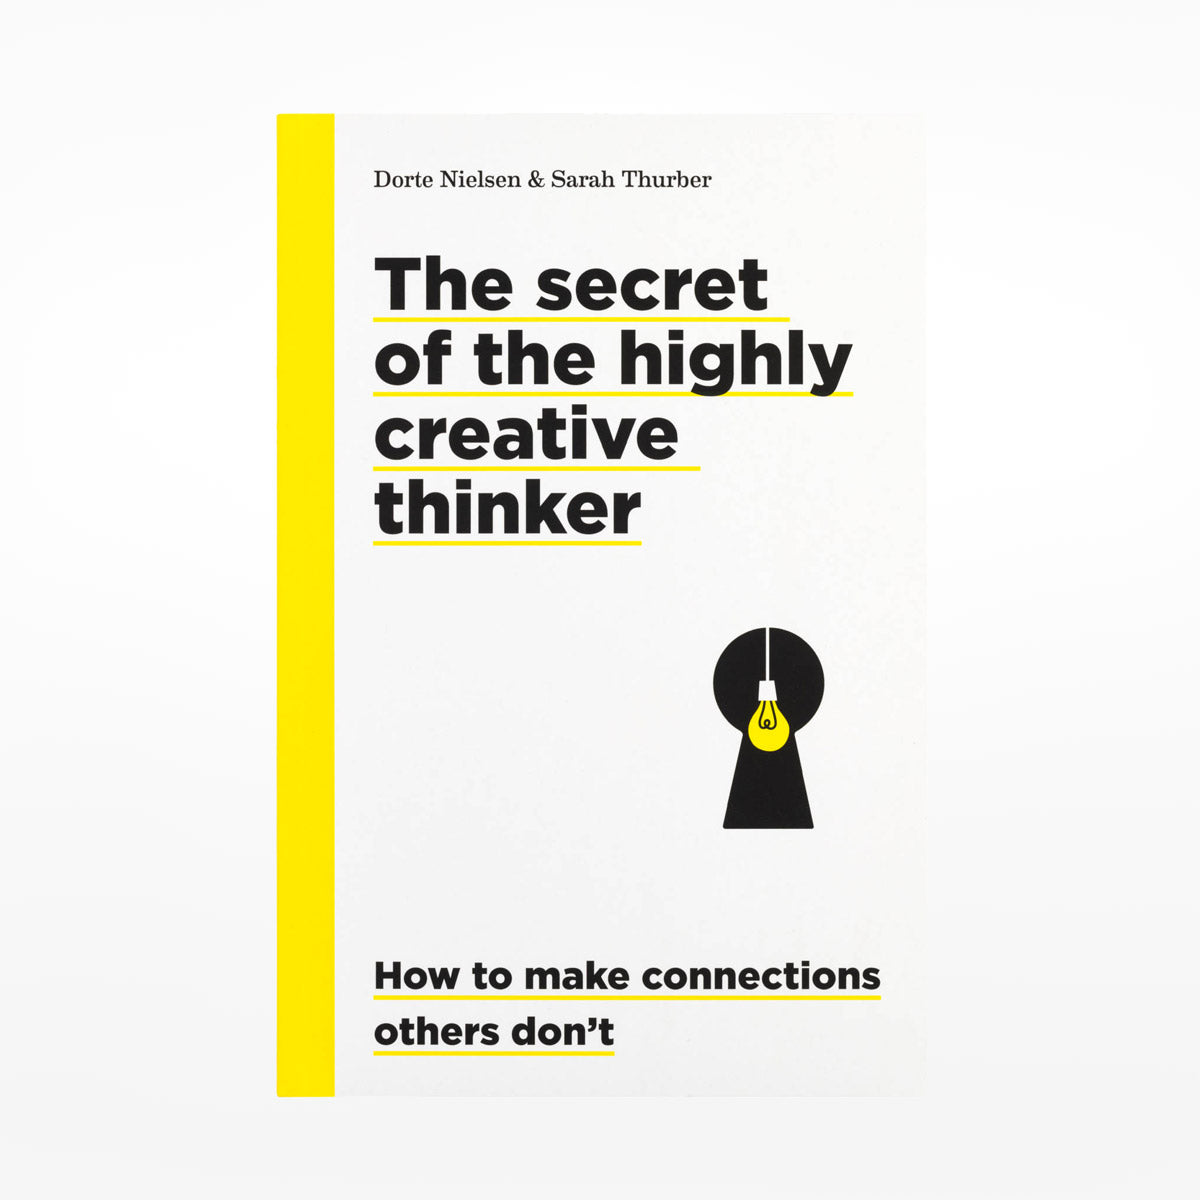 The Secret of the Highly Creative Thinker: How to Make Connections Others Don't